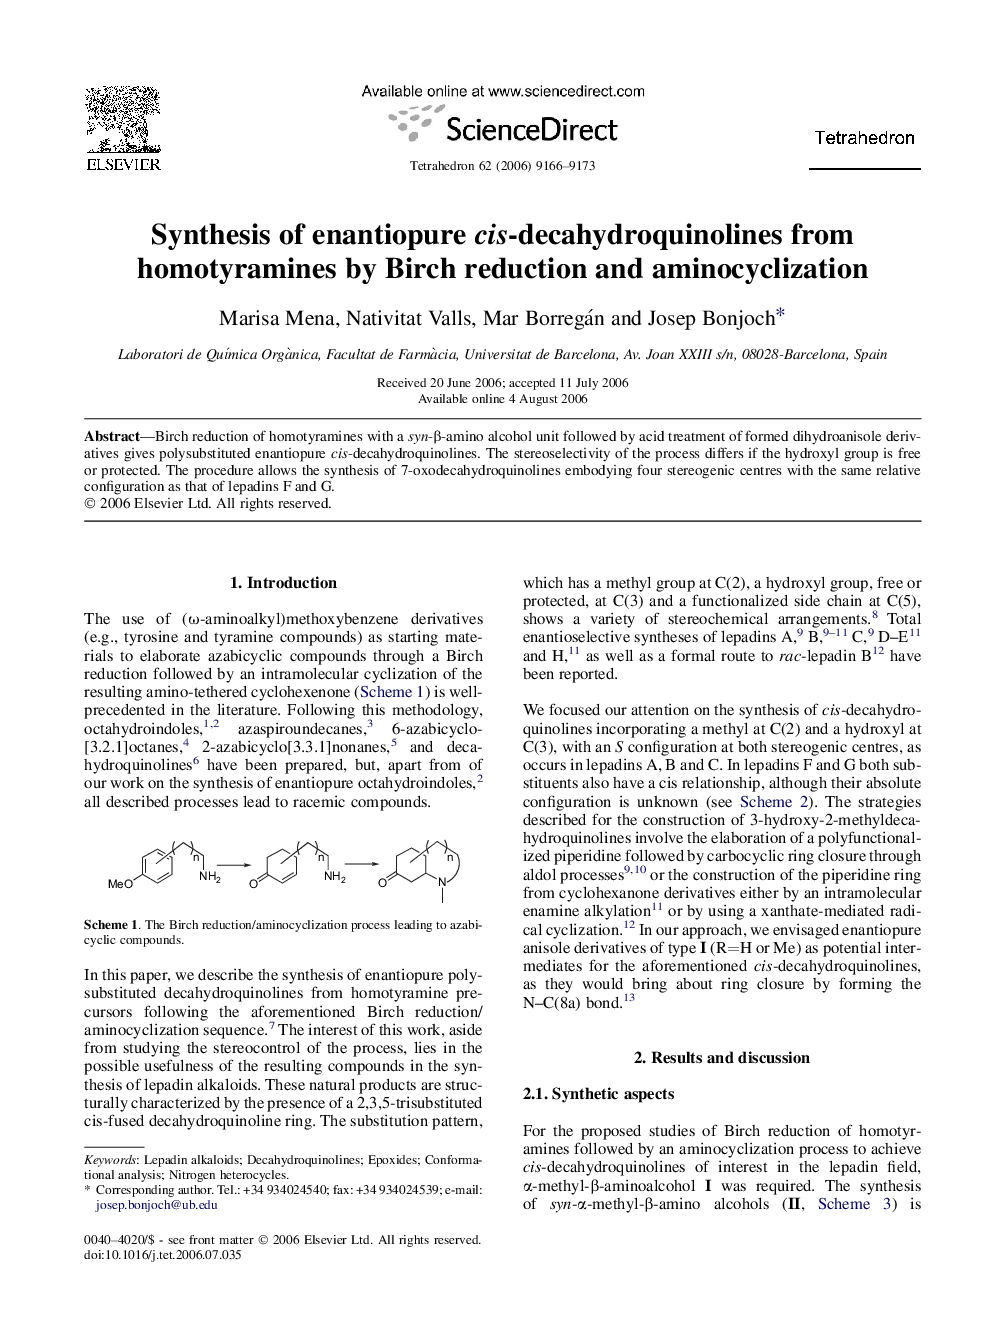 Synthesis of enantiopure cis-decahydroquinolines from homotyramines by Birch reduction and aminocyclization